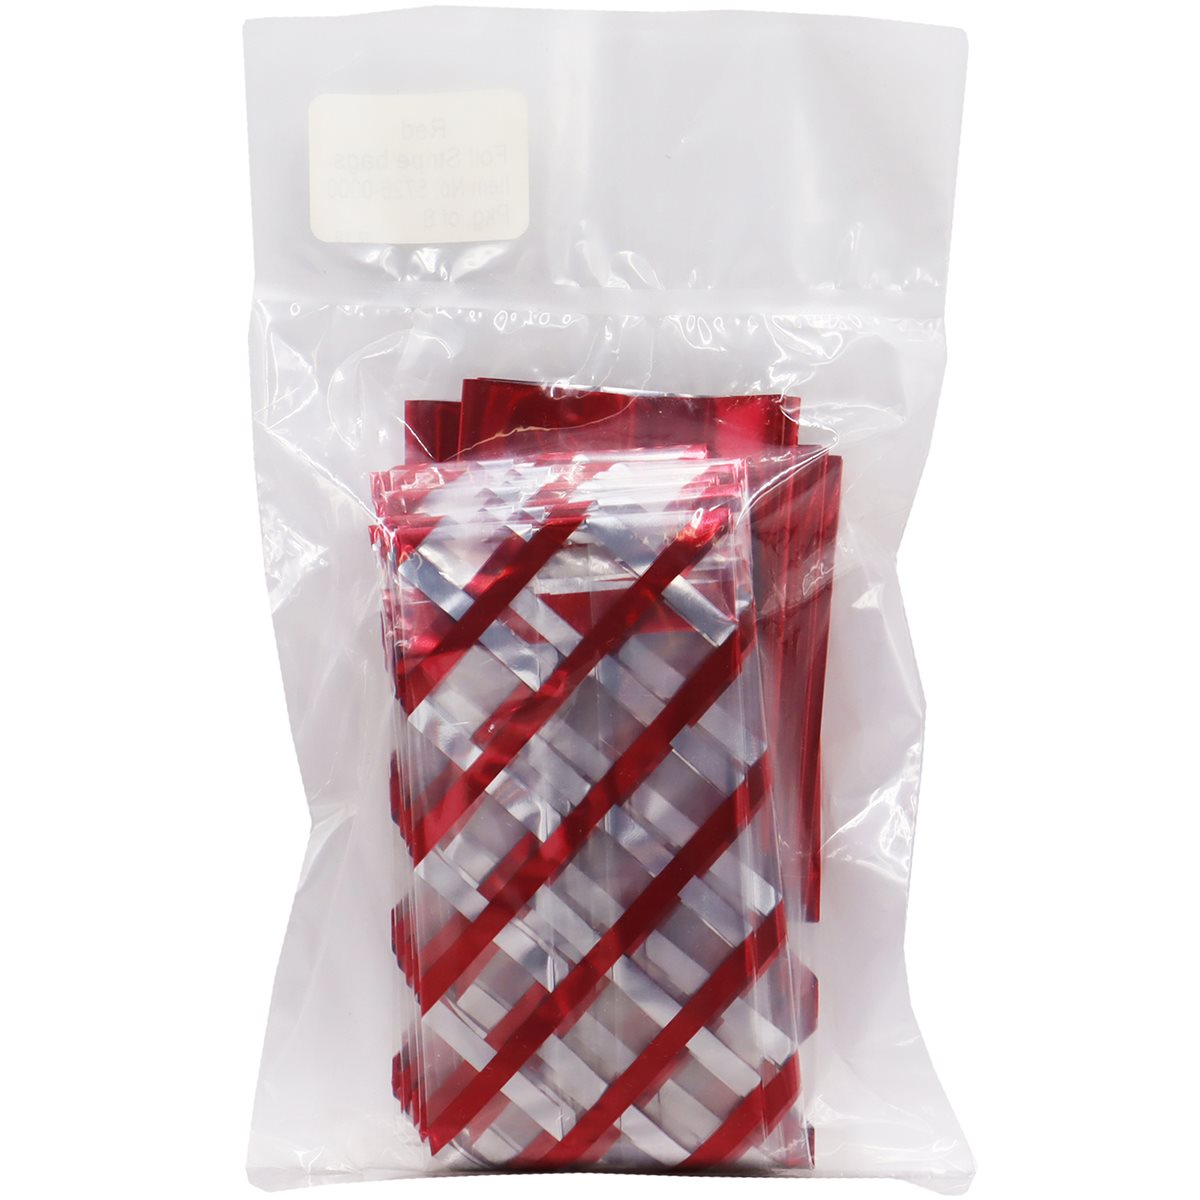 Candy Bags, Red Foil Stripe (8 pack)